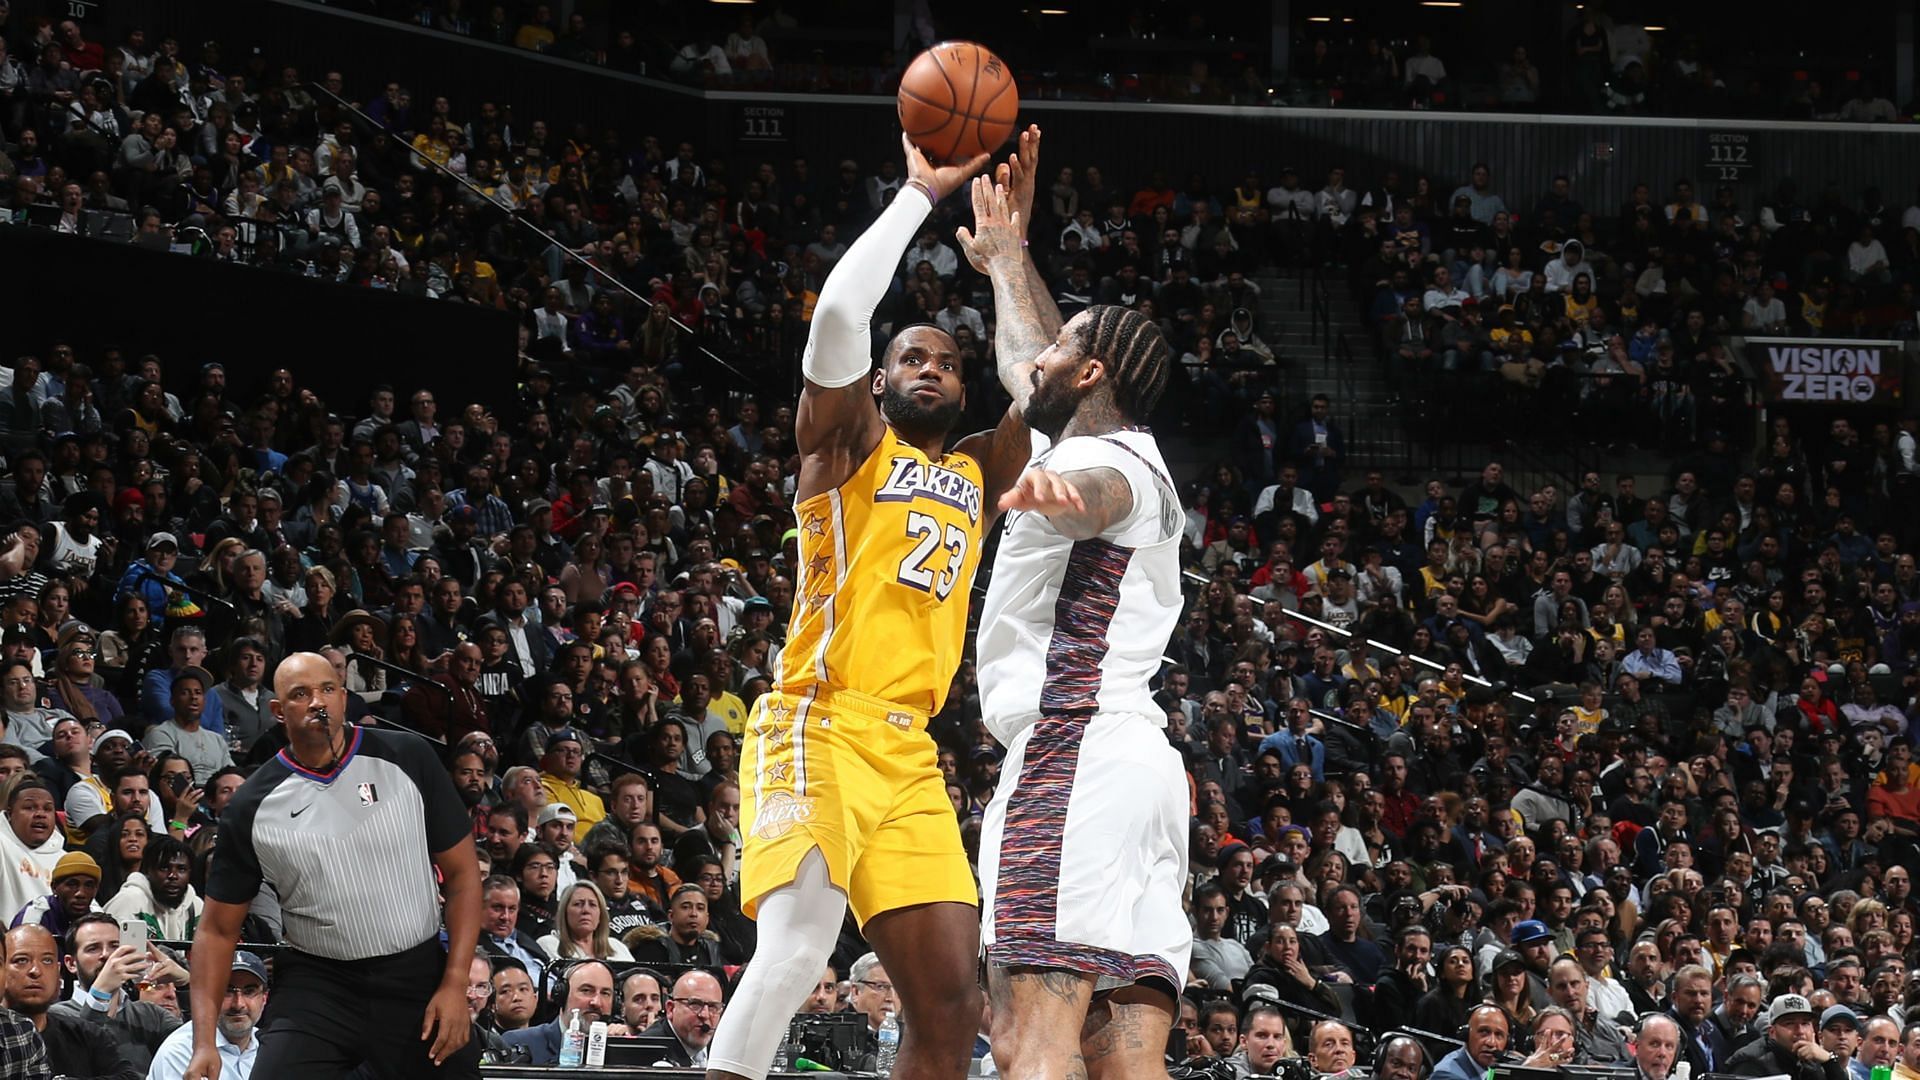 LA Lakers superstar LeBron James never shies away from a three-point shot if allowed by the defense [Photo: NBA.com India]